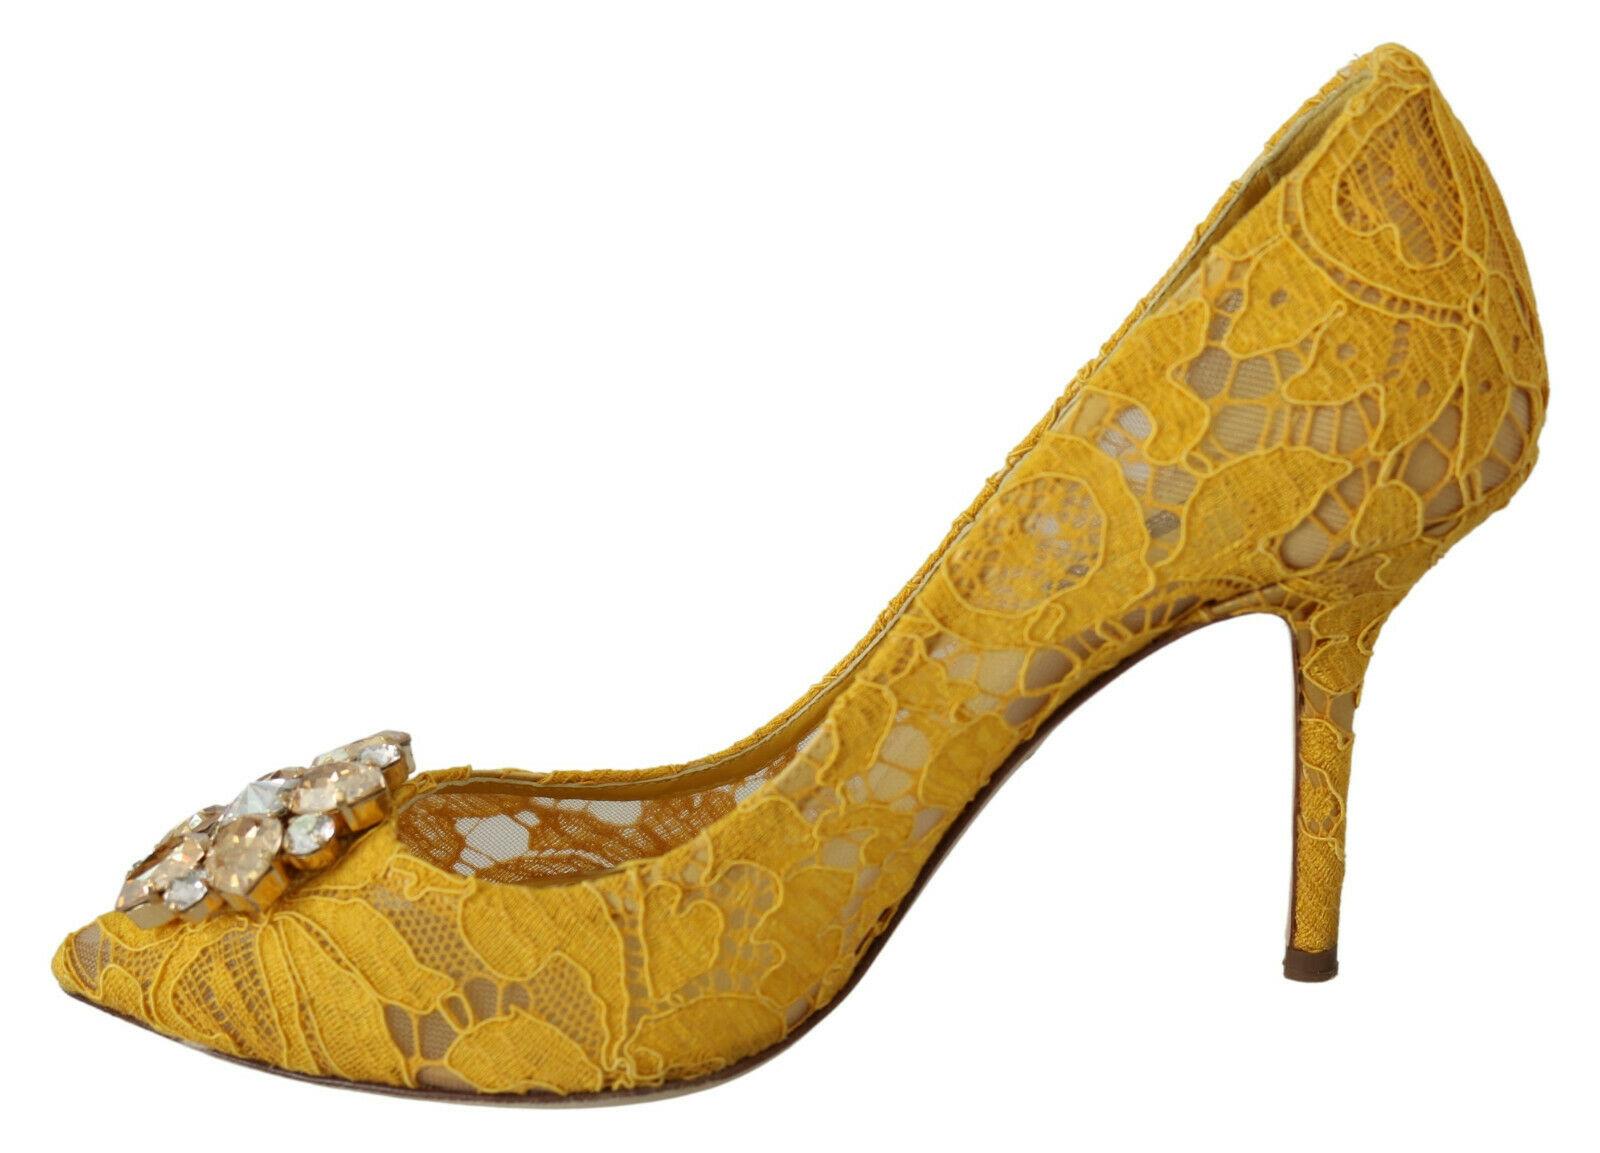  Gorgeous brand new with tags, 100% Authentic Dolce & Gabbana Pointy pumps with jewel rhinestones.
 


Model: Pumps

Color: Yellow
Material: 57% Viscose 36% Cotton 5% Nylon 2% Silk


Sole: Leather


Logo details

Very high quality and comfort

Made